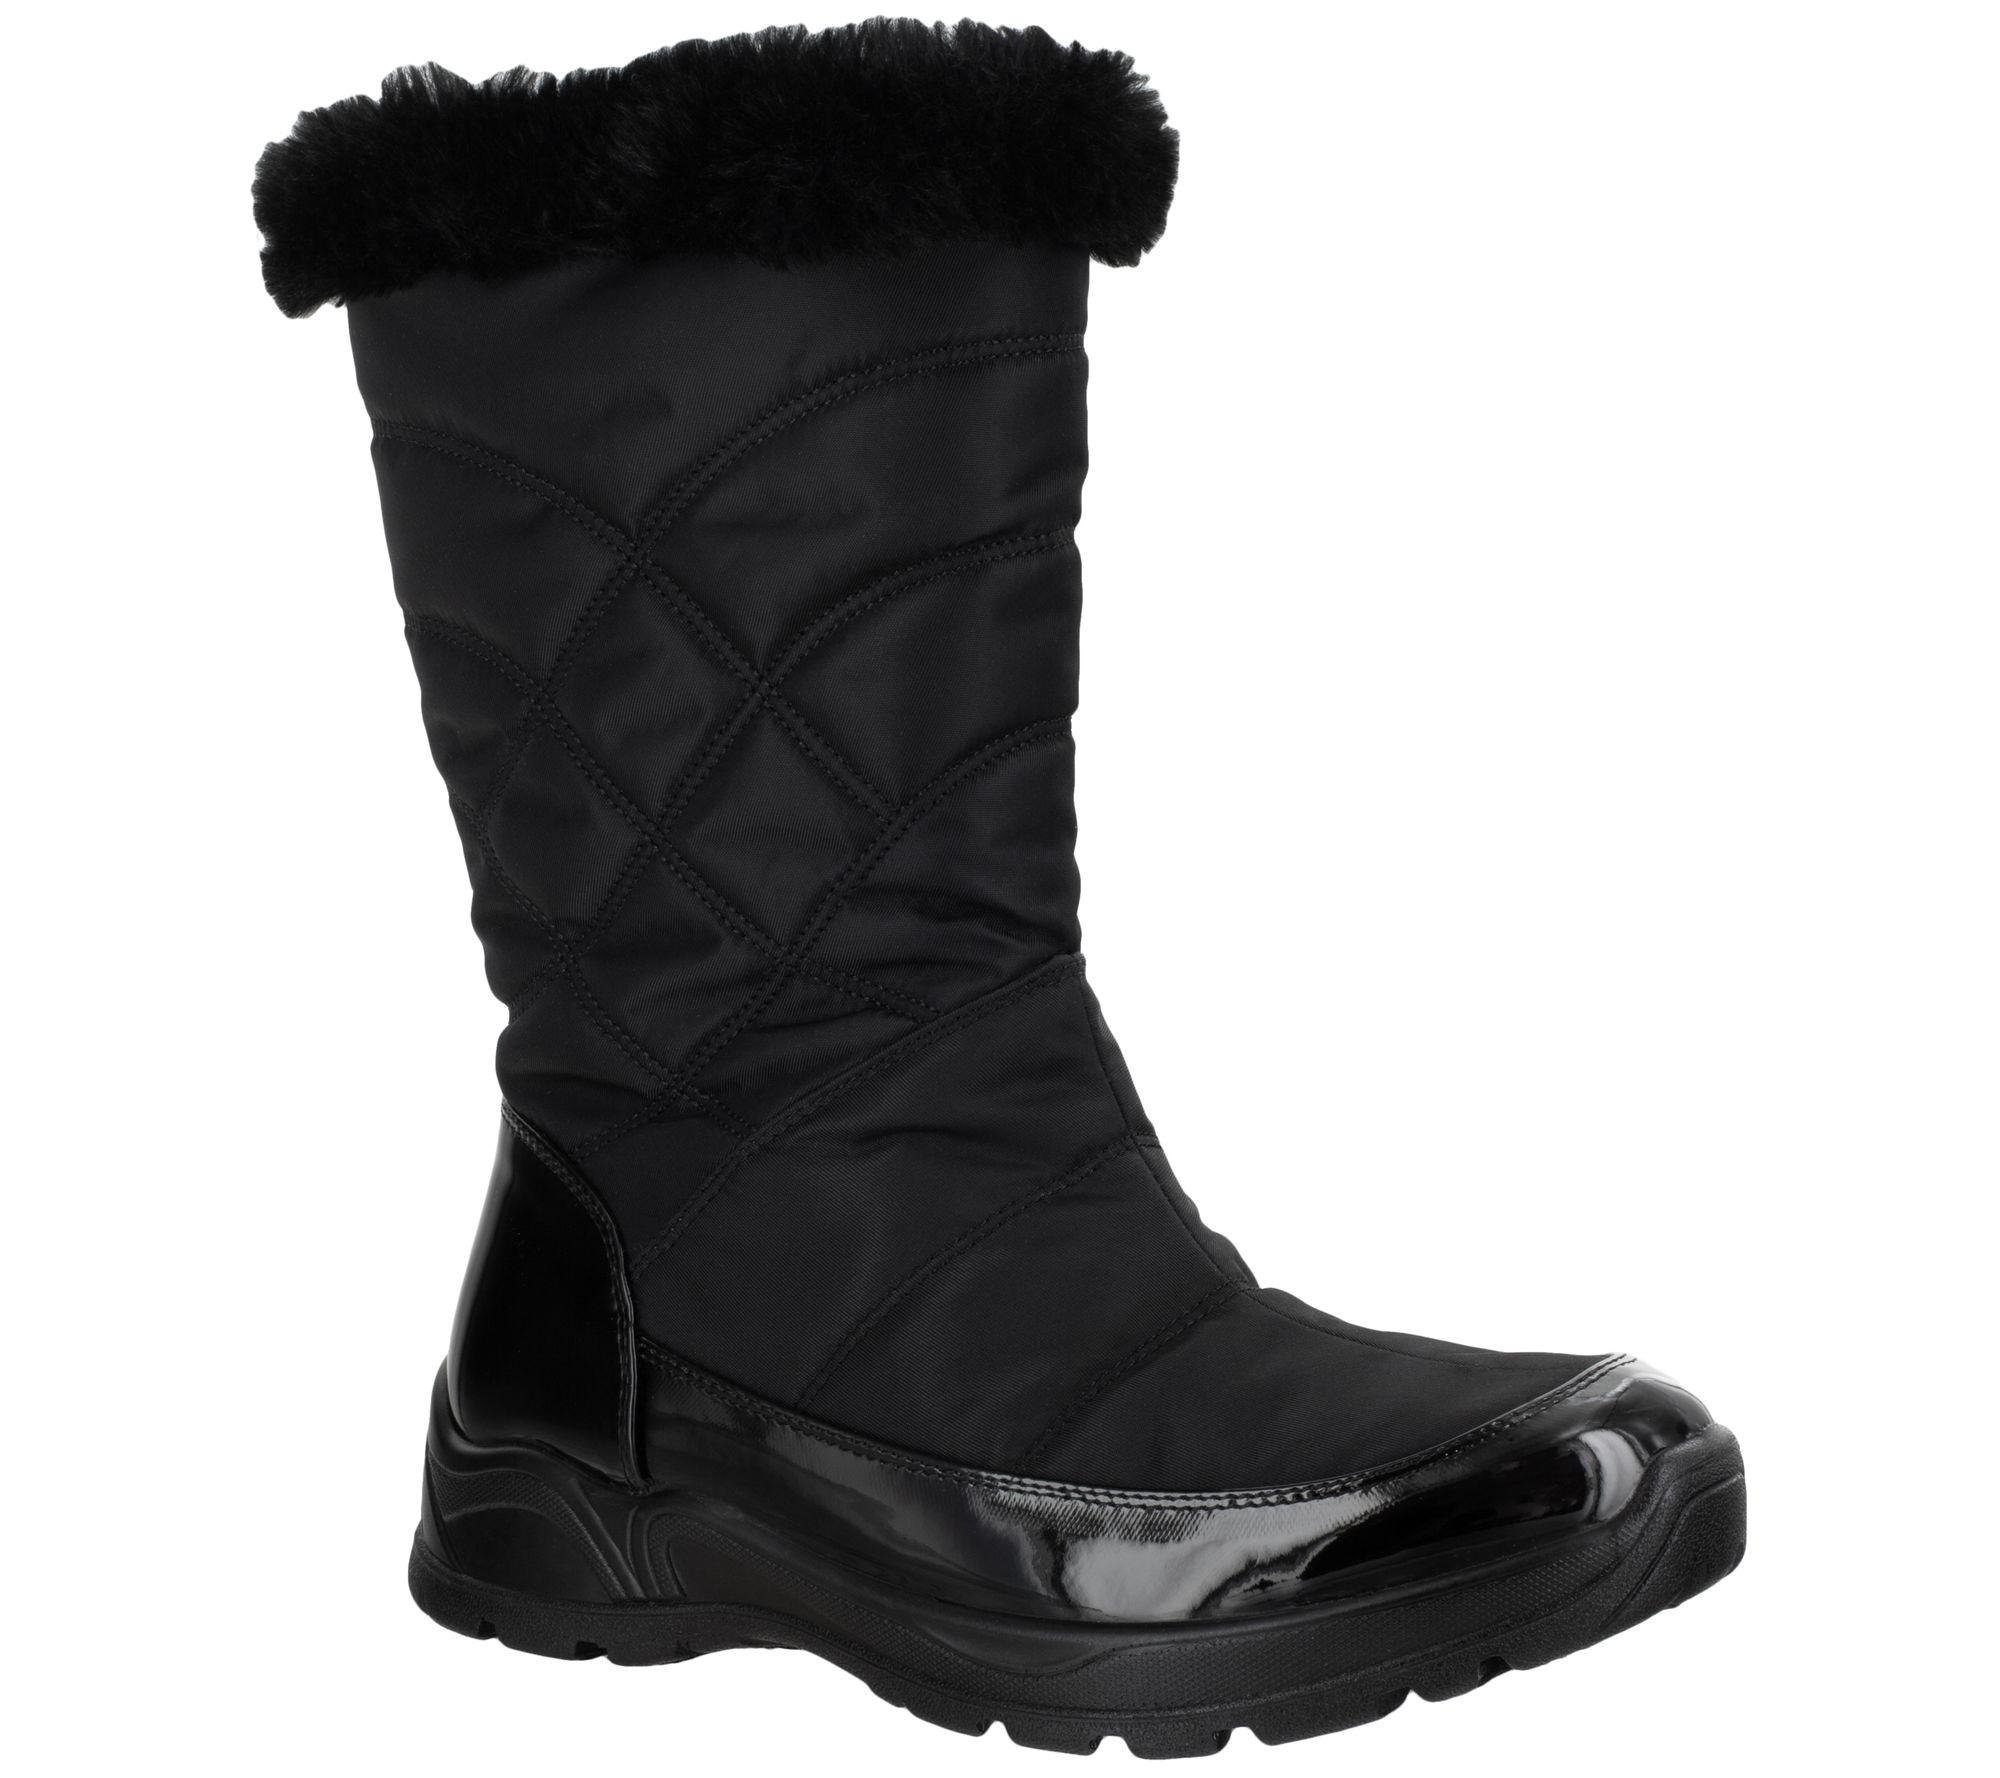 Easy Dry by Easy Street Waterproof Weather Boots - Cuddle - QVC.com